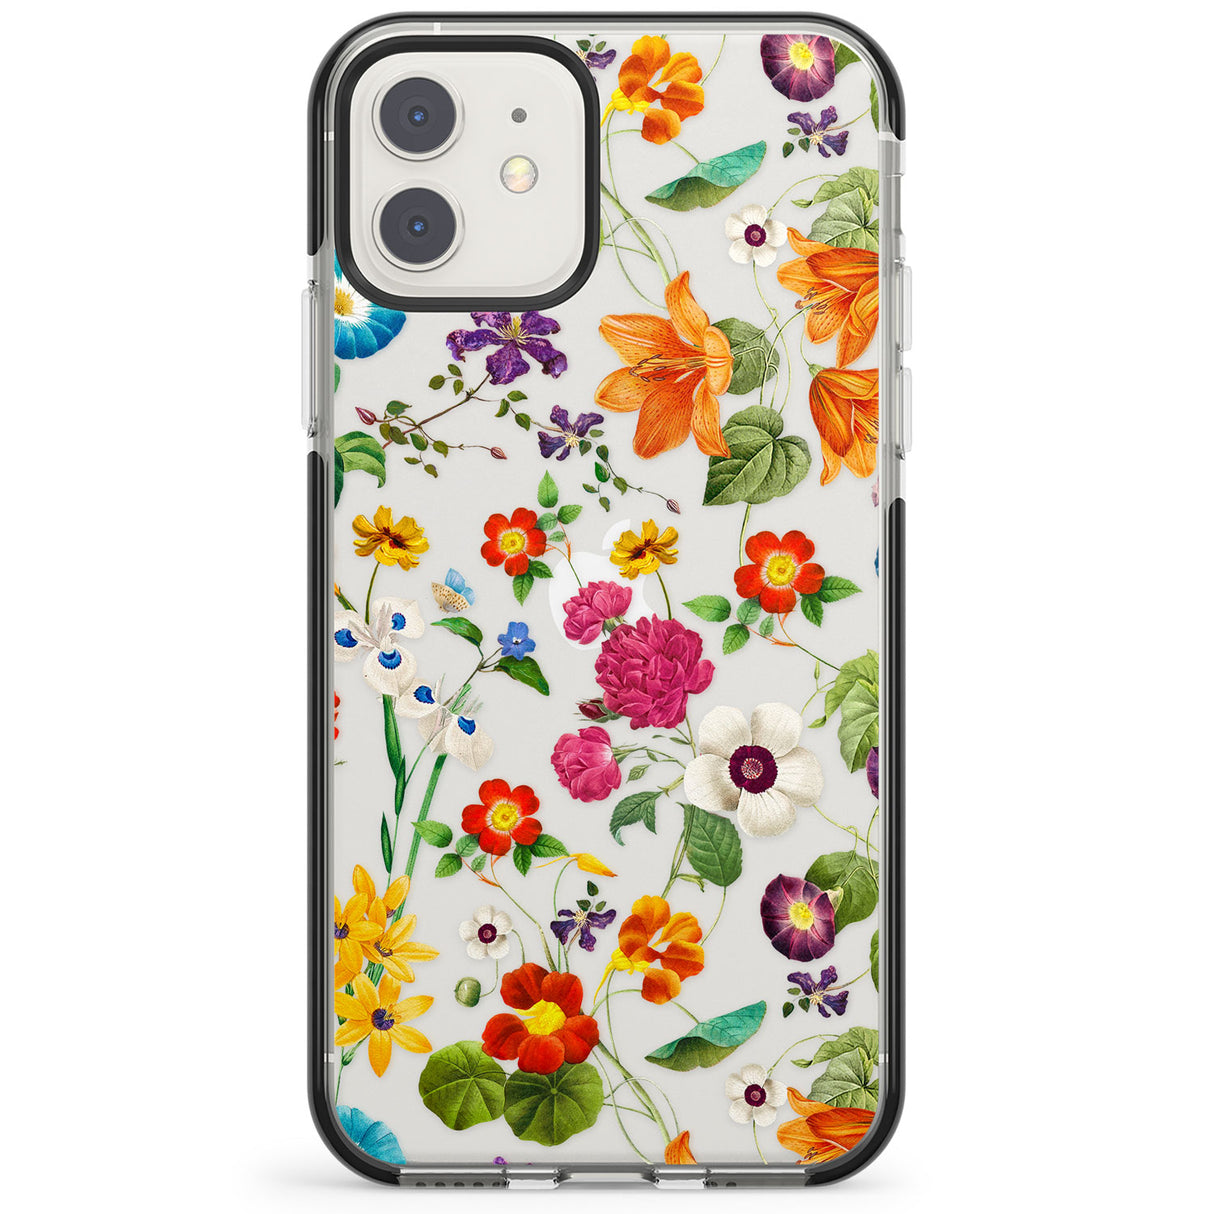 Whimsical Wildflowers Impact Phone Case for iPhone 11, iphone 12